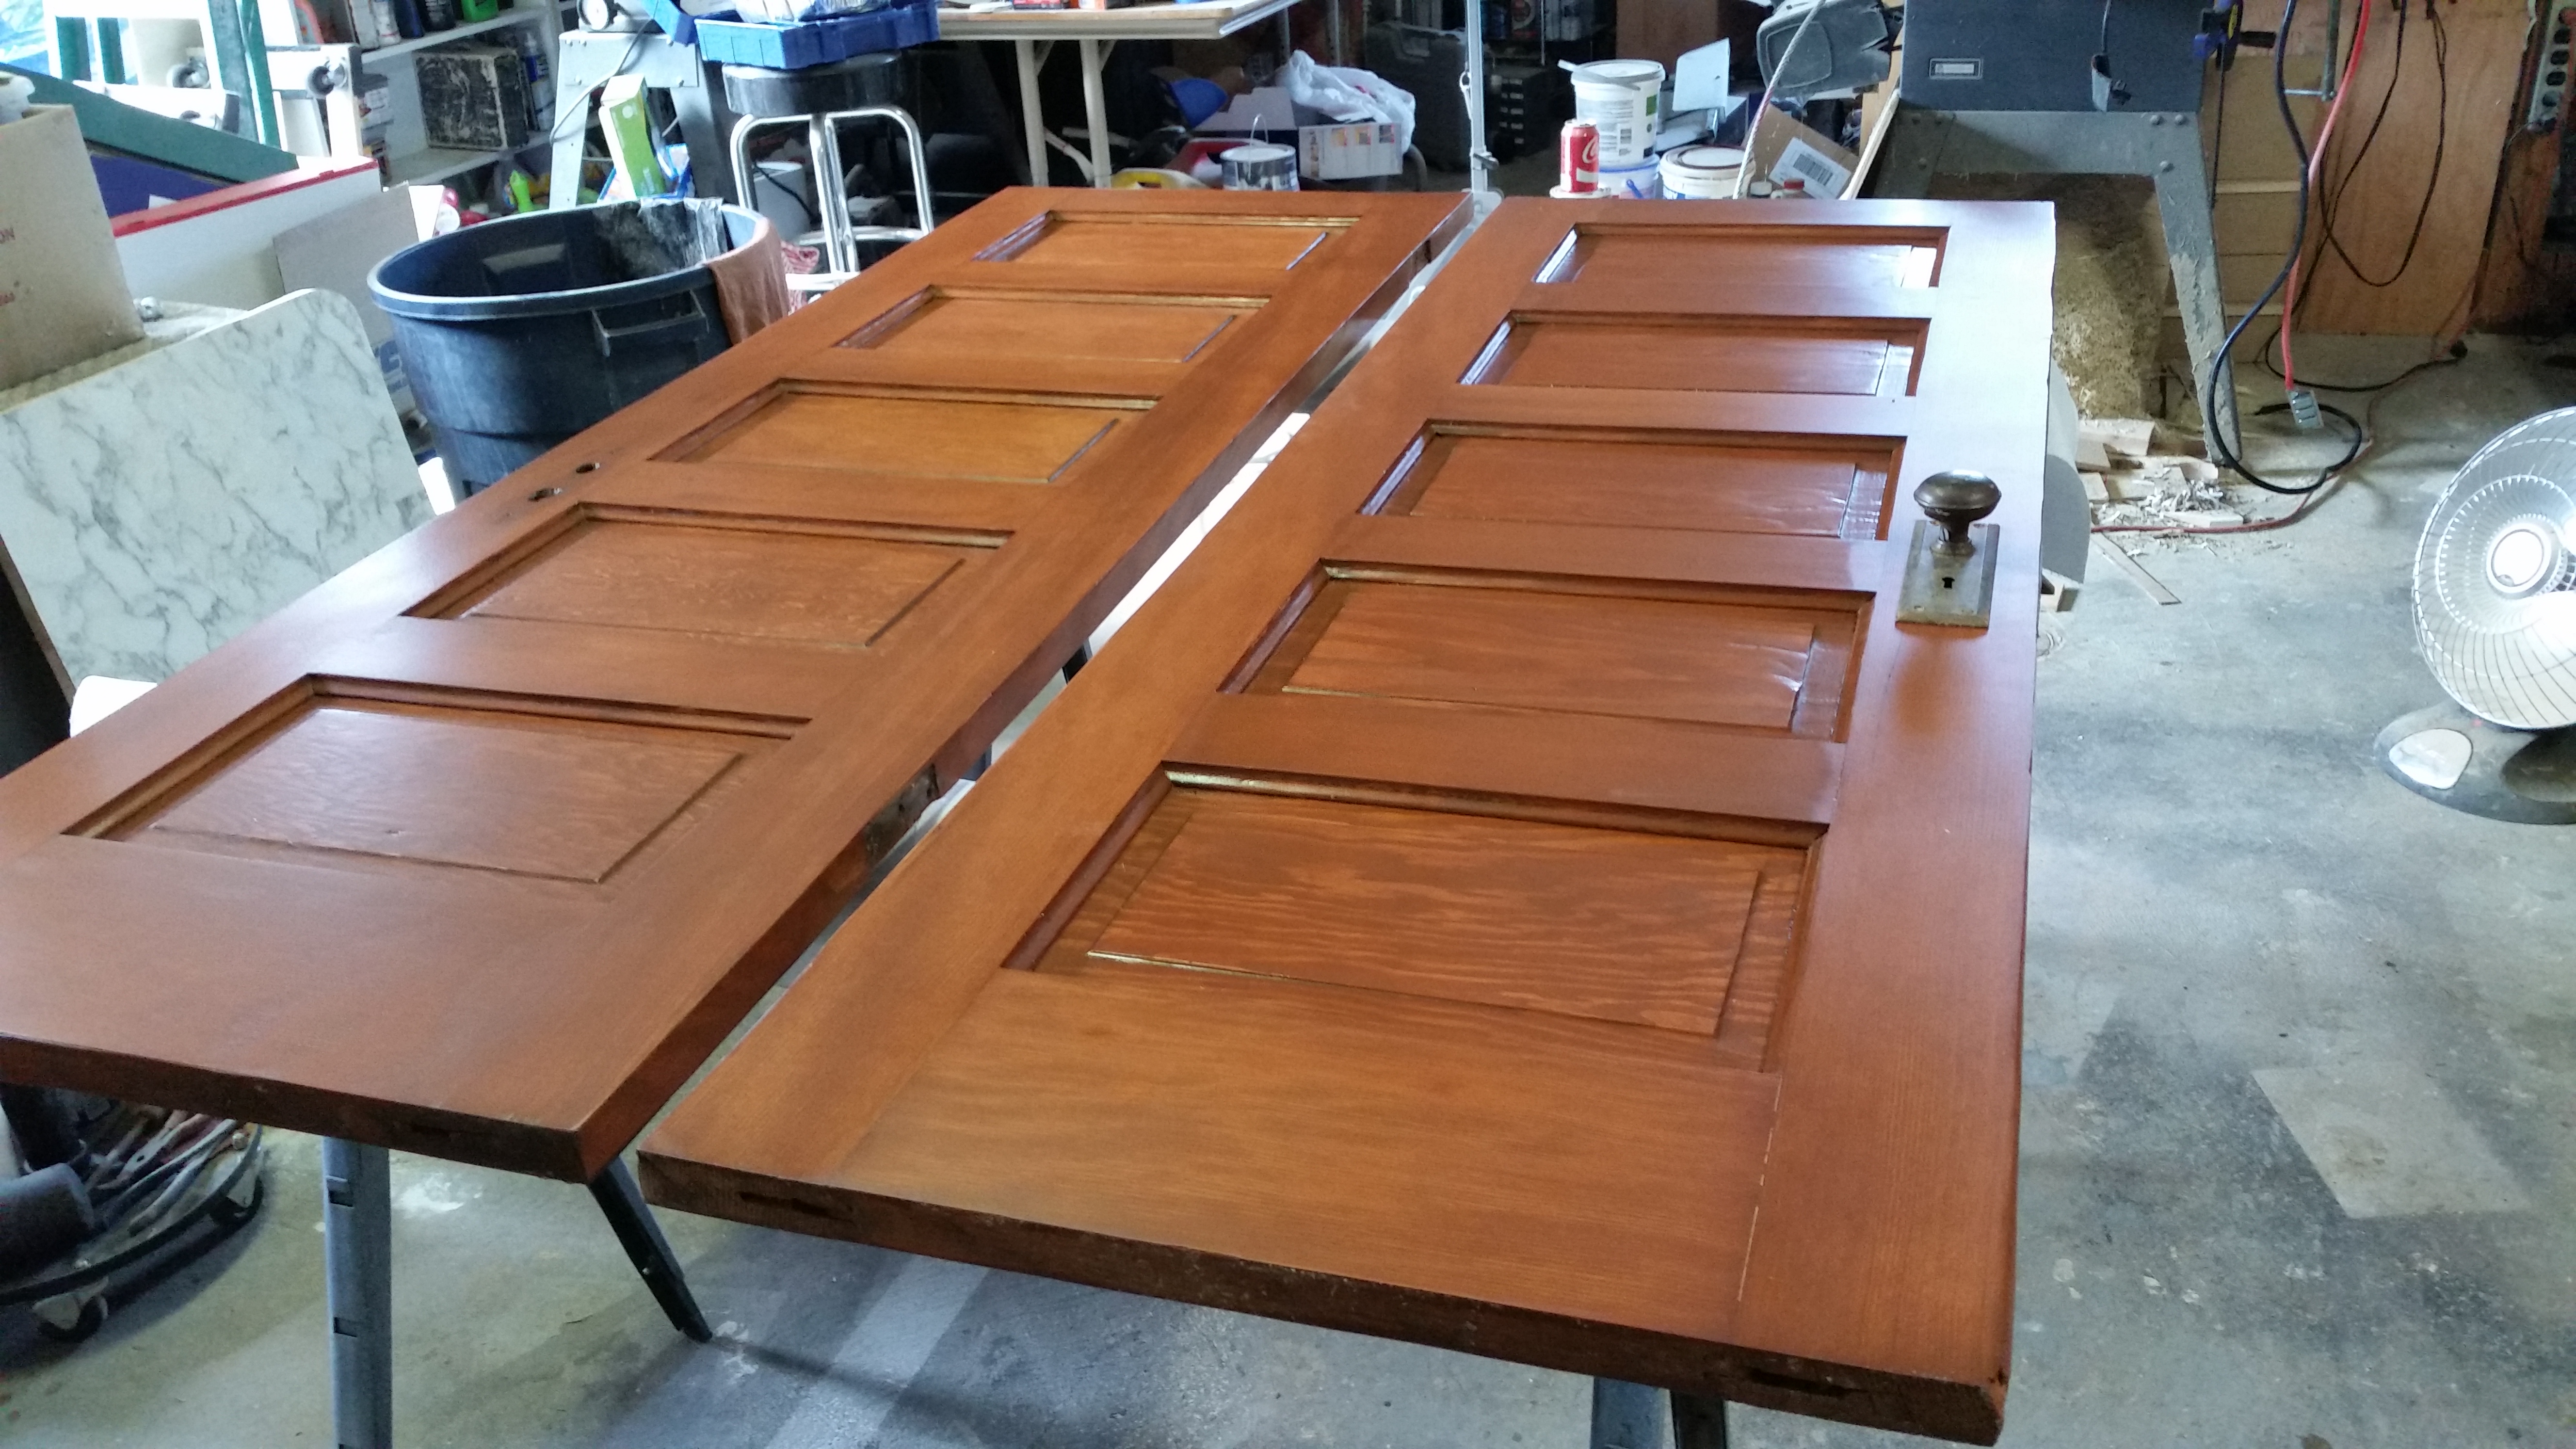 Stripping and Refinishing raised-panel doors – part 2